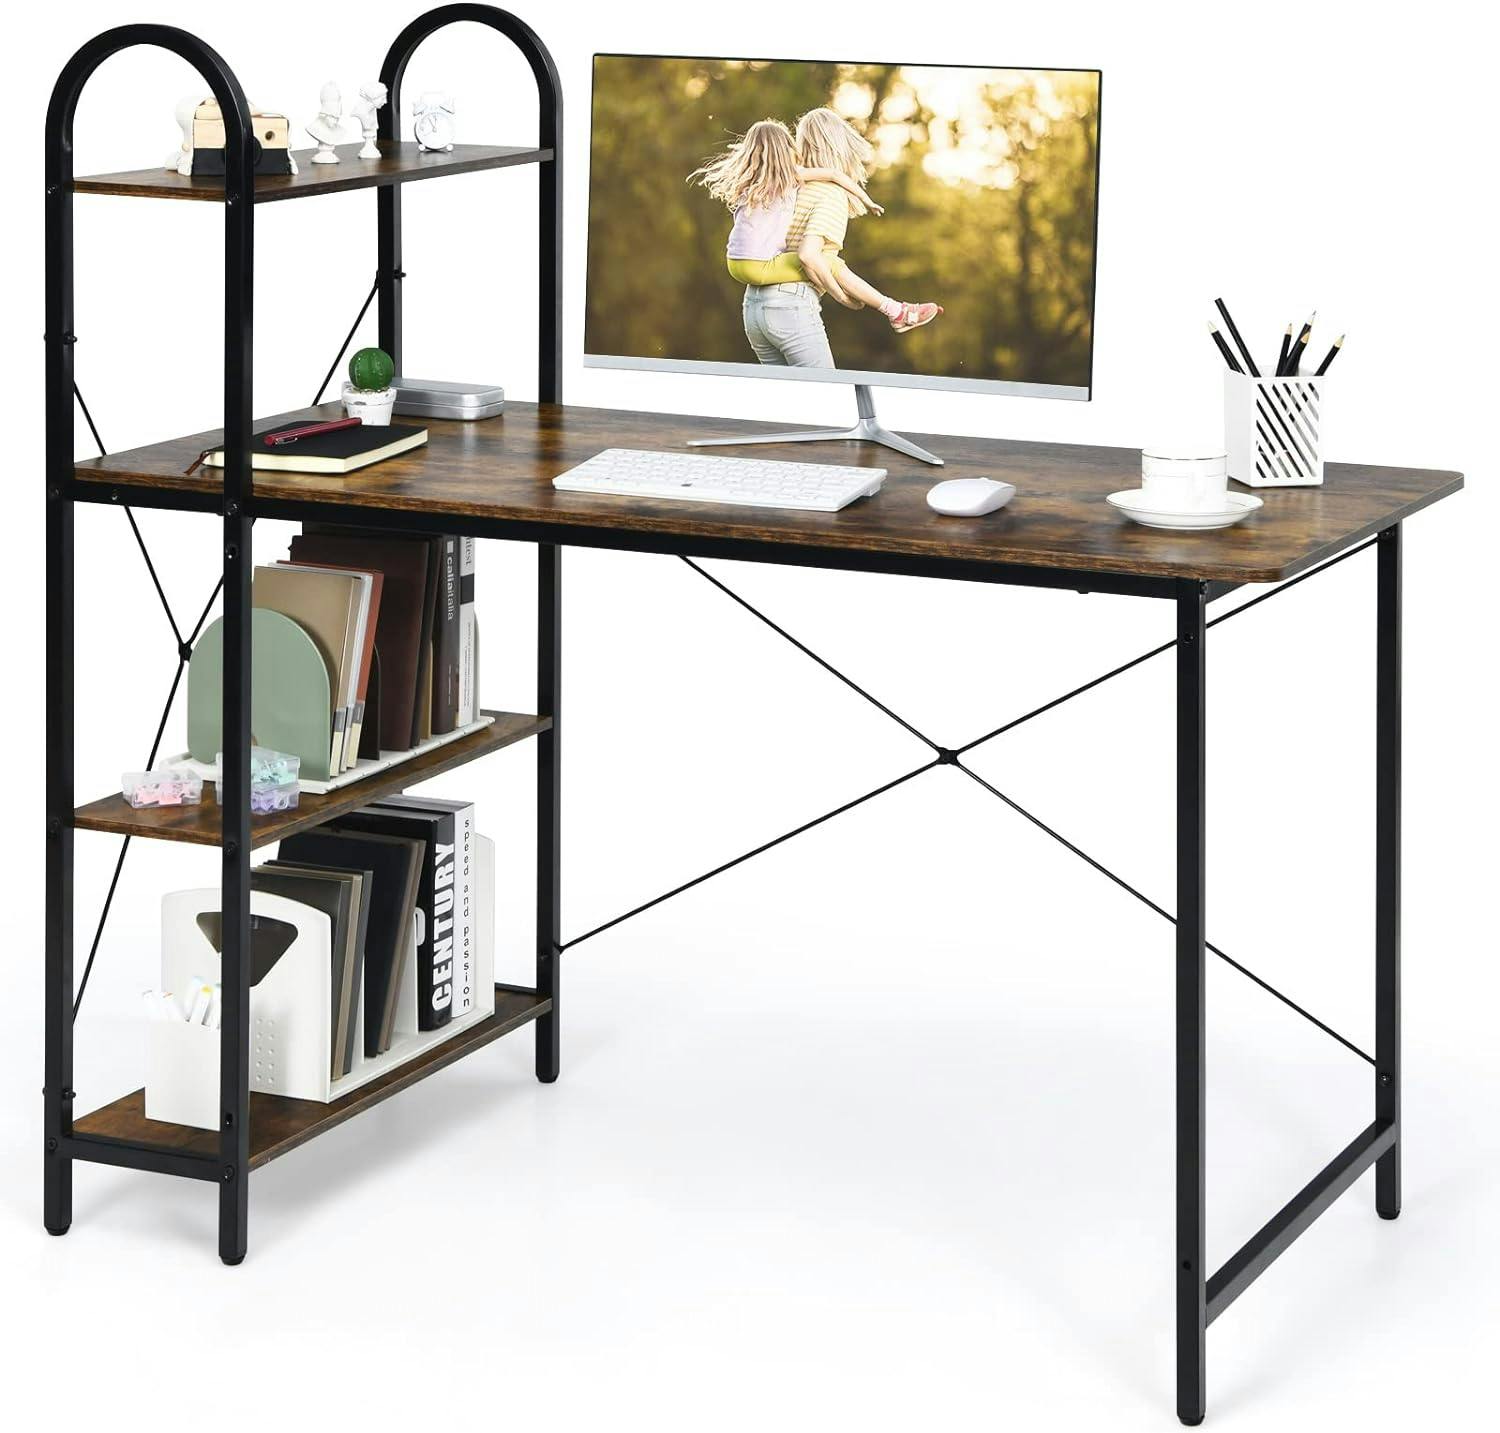 Rustic Brown 48'' Reversible Computer Desk with Metal Frame and Storage Shelves